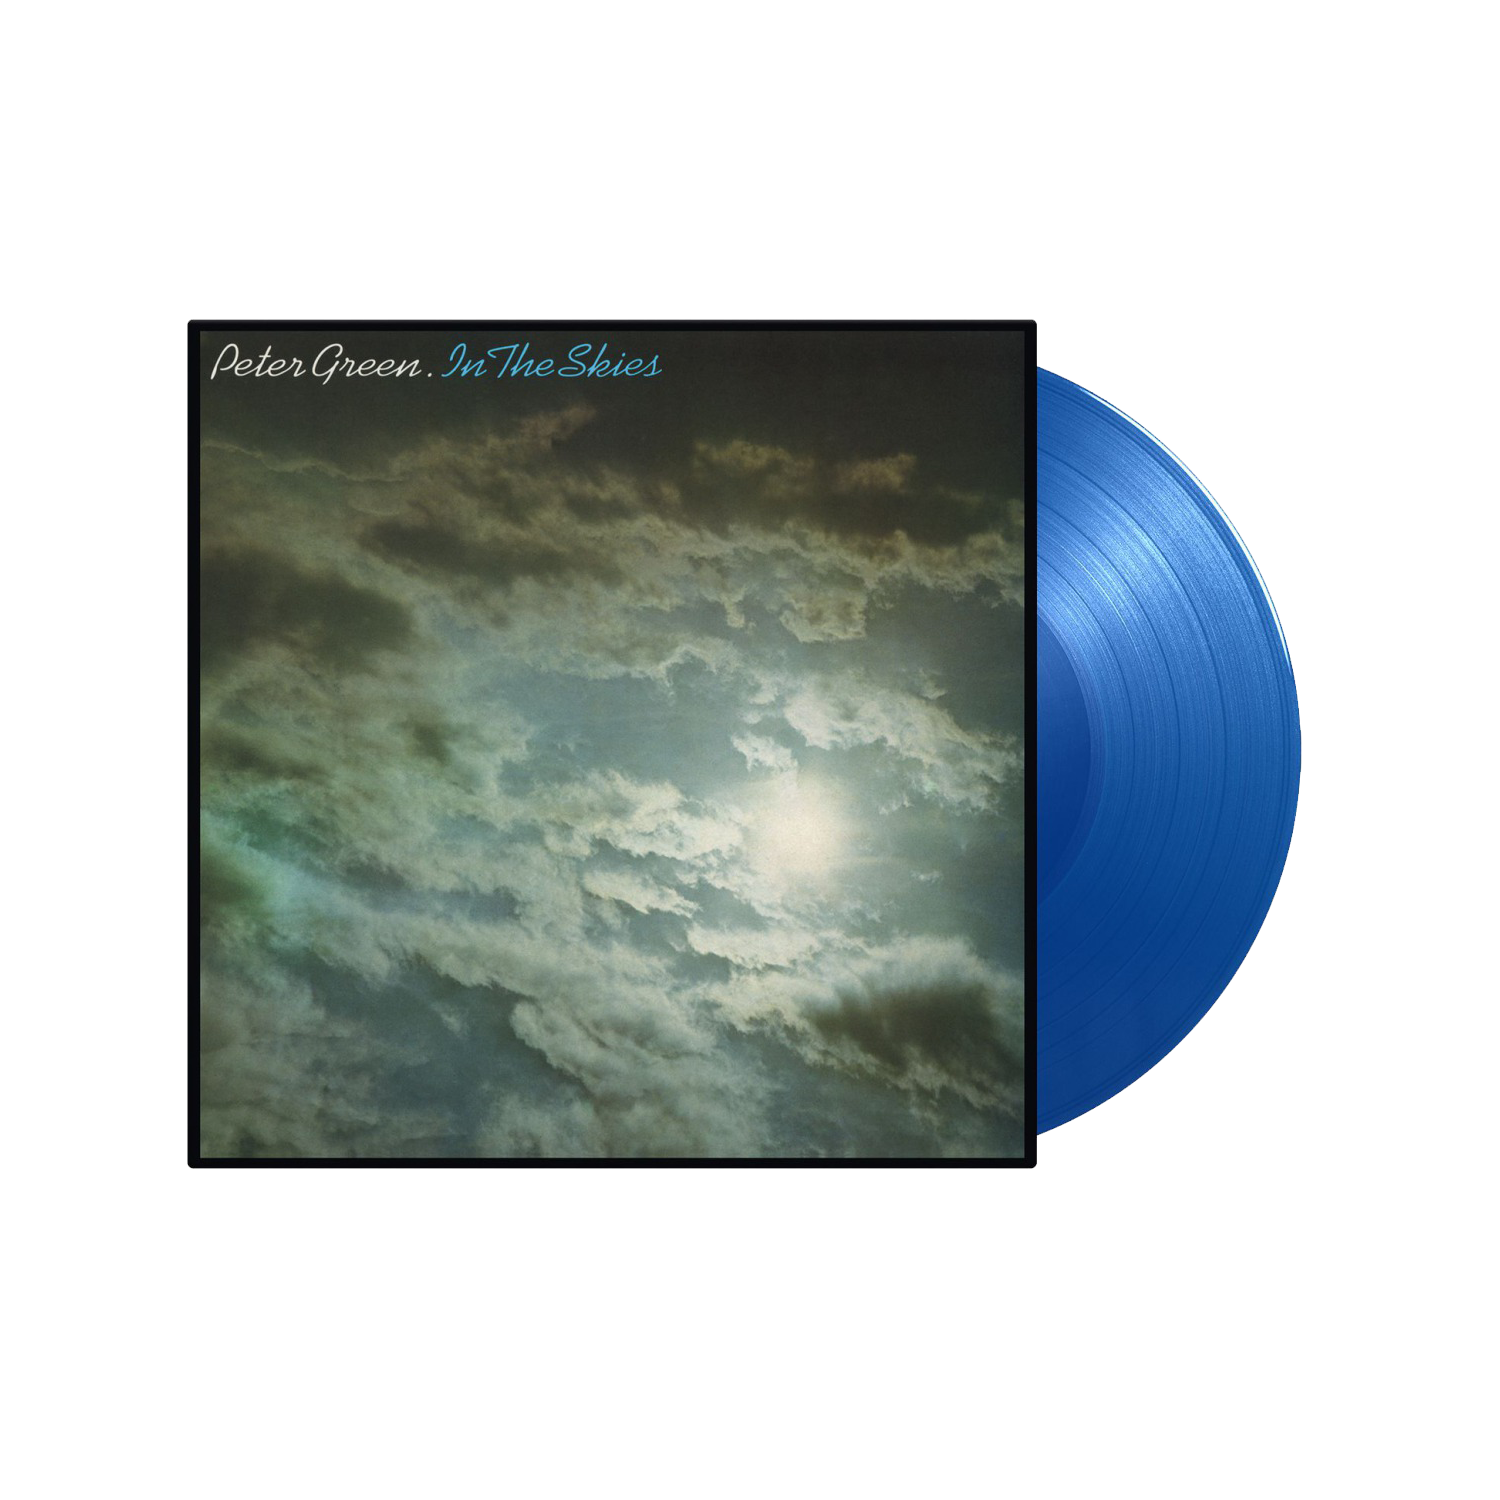 Peter Green -  In The Skies: Limited Translucent Blue Vinyl LP